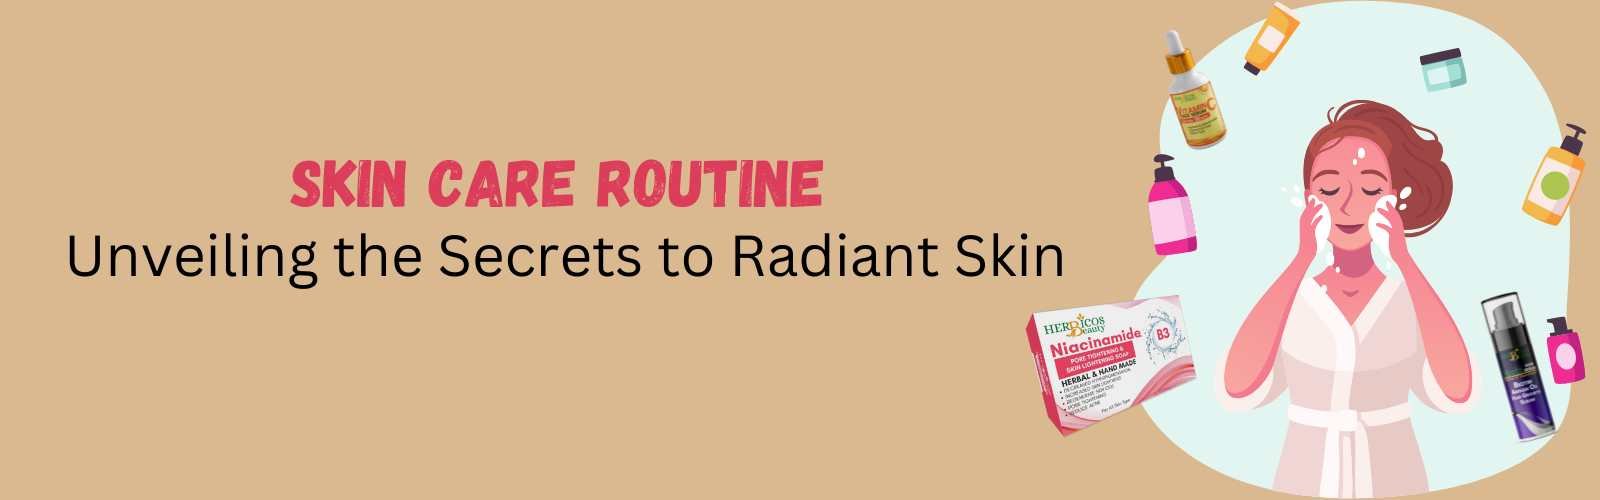 Skin Care Routine: Unveiling the Secrets to Radiant Skin